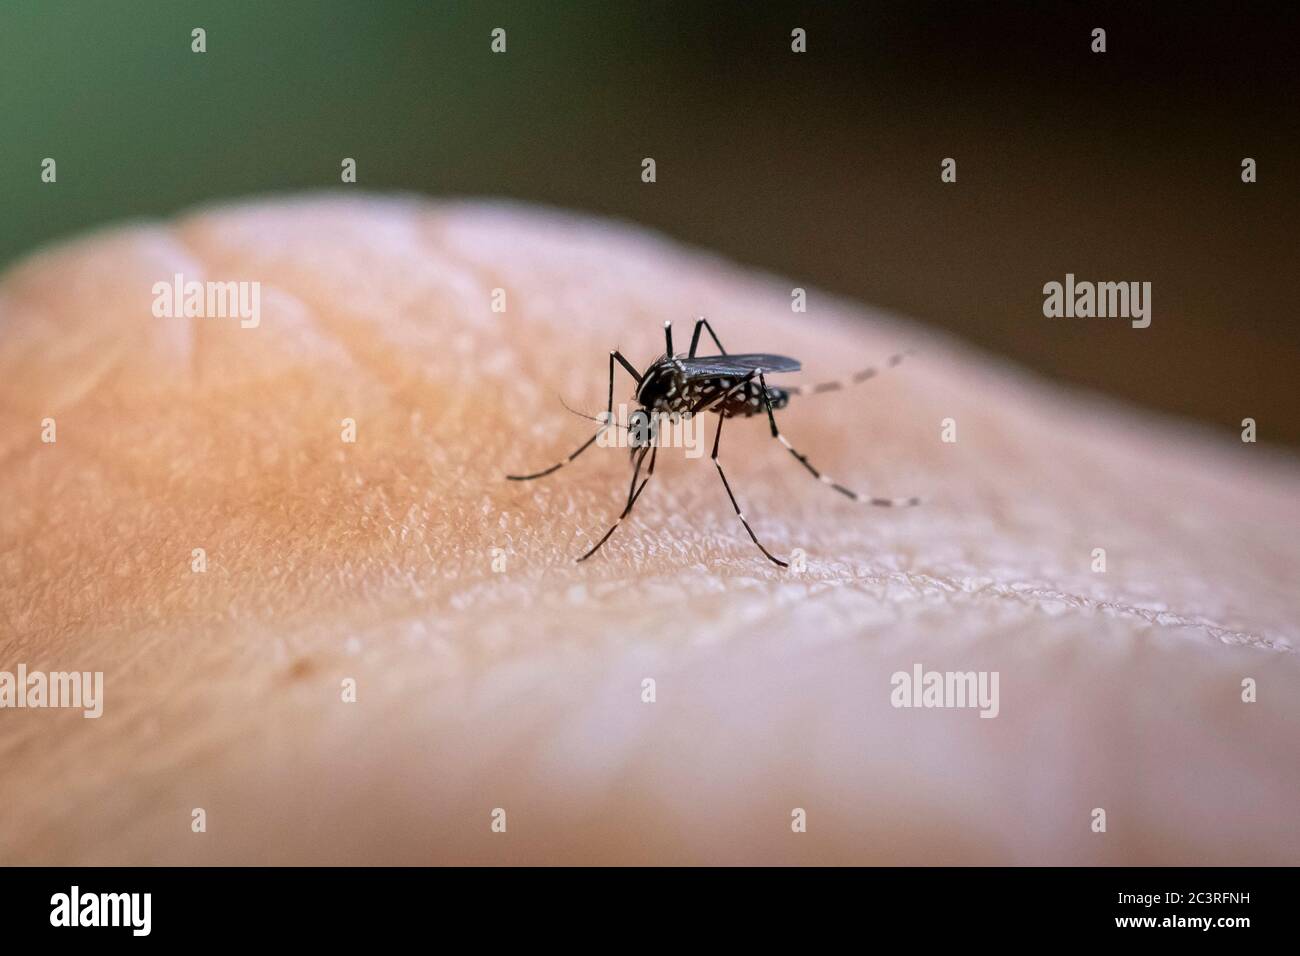 Aedes aegypti mosquito biting human skin. Transmitter of various diseases such as dengue, zika and chikungunya fever. Stock Photo